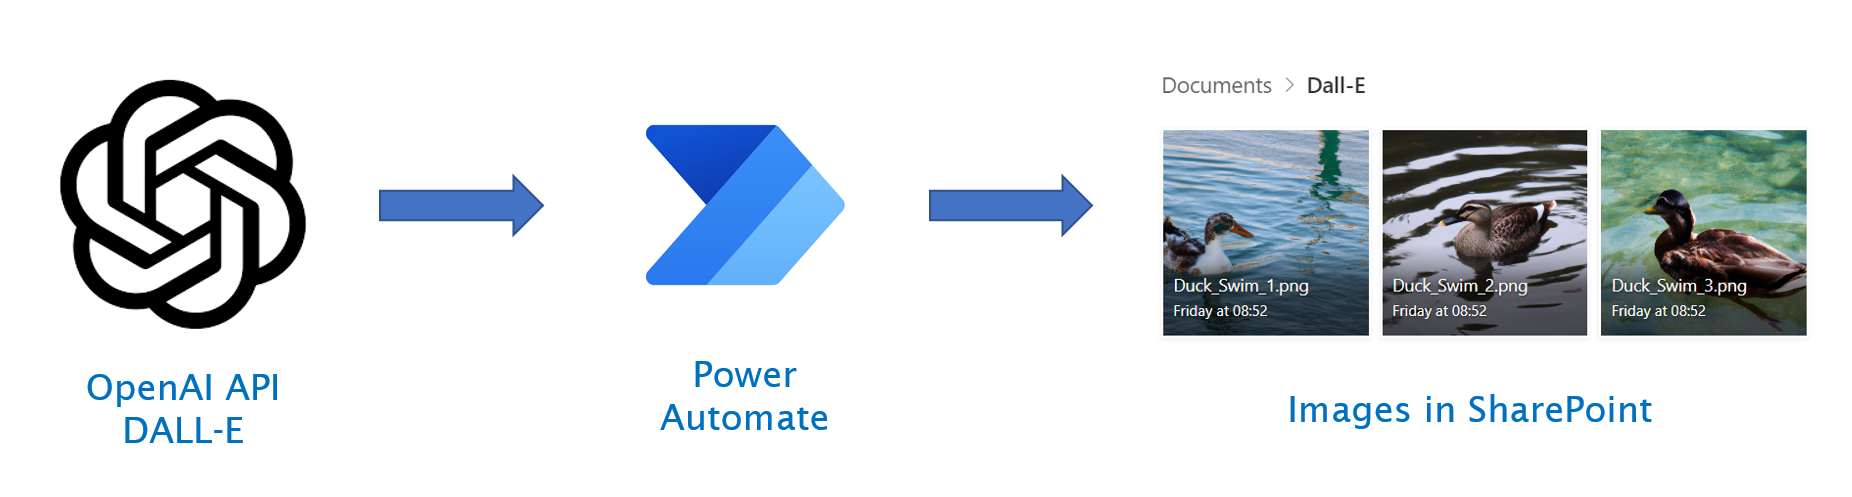 Generate Images in SharePoint with OpenAI API DALL-E and Power Automate